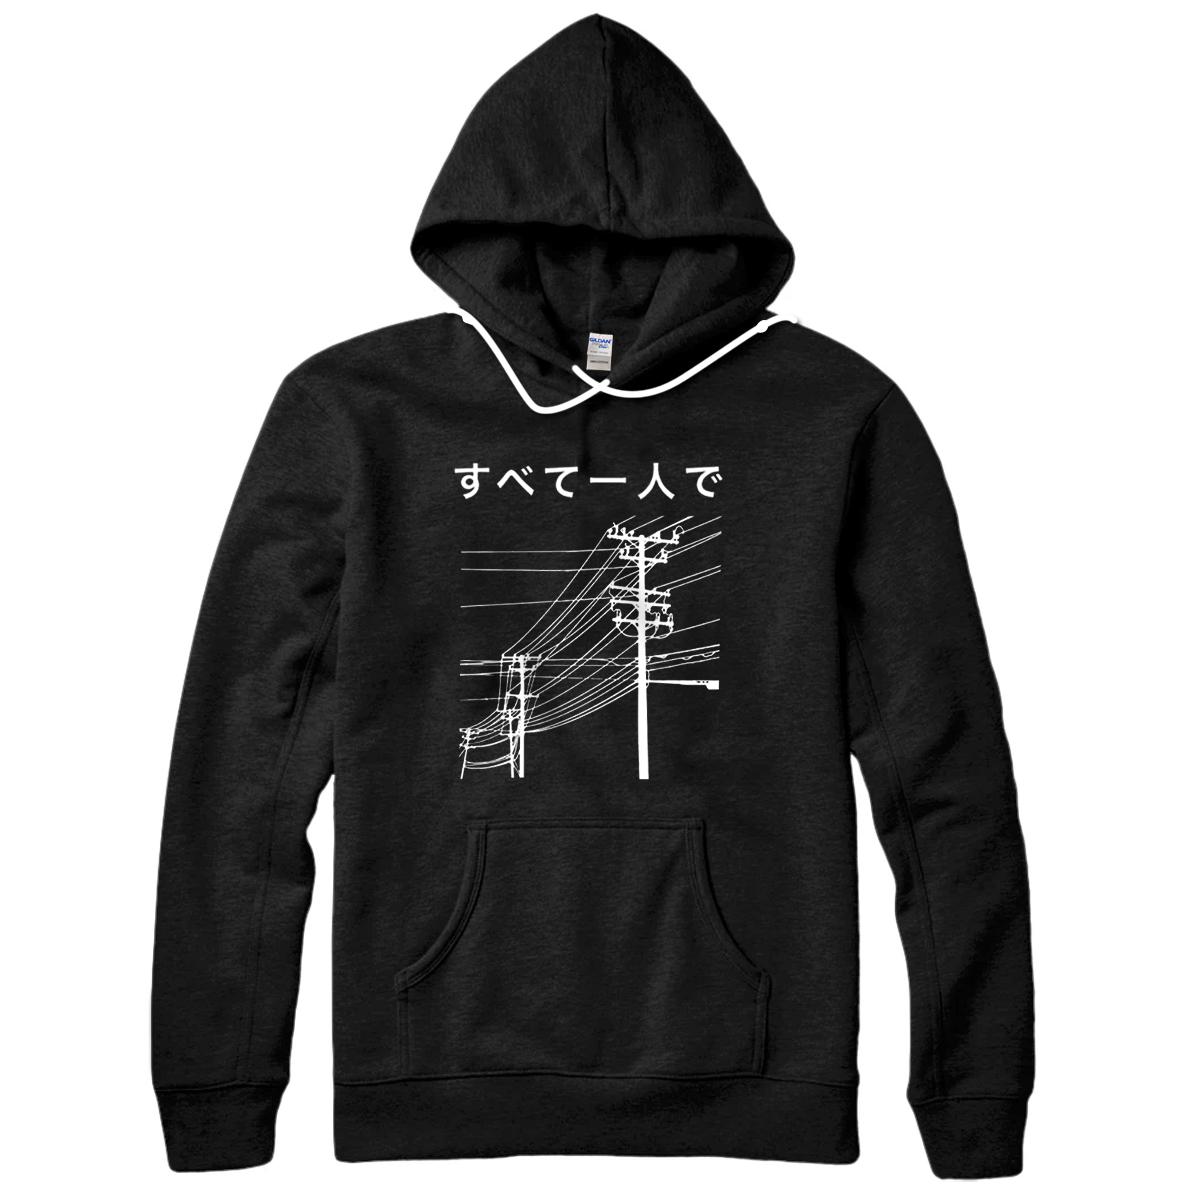 Personalized All Alone Japanese pullover - Kawaii, Anime, Manga Pullover Hoodie